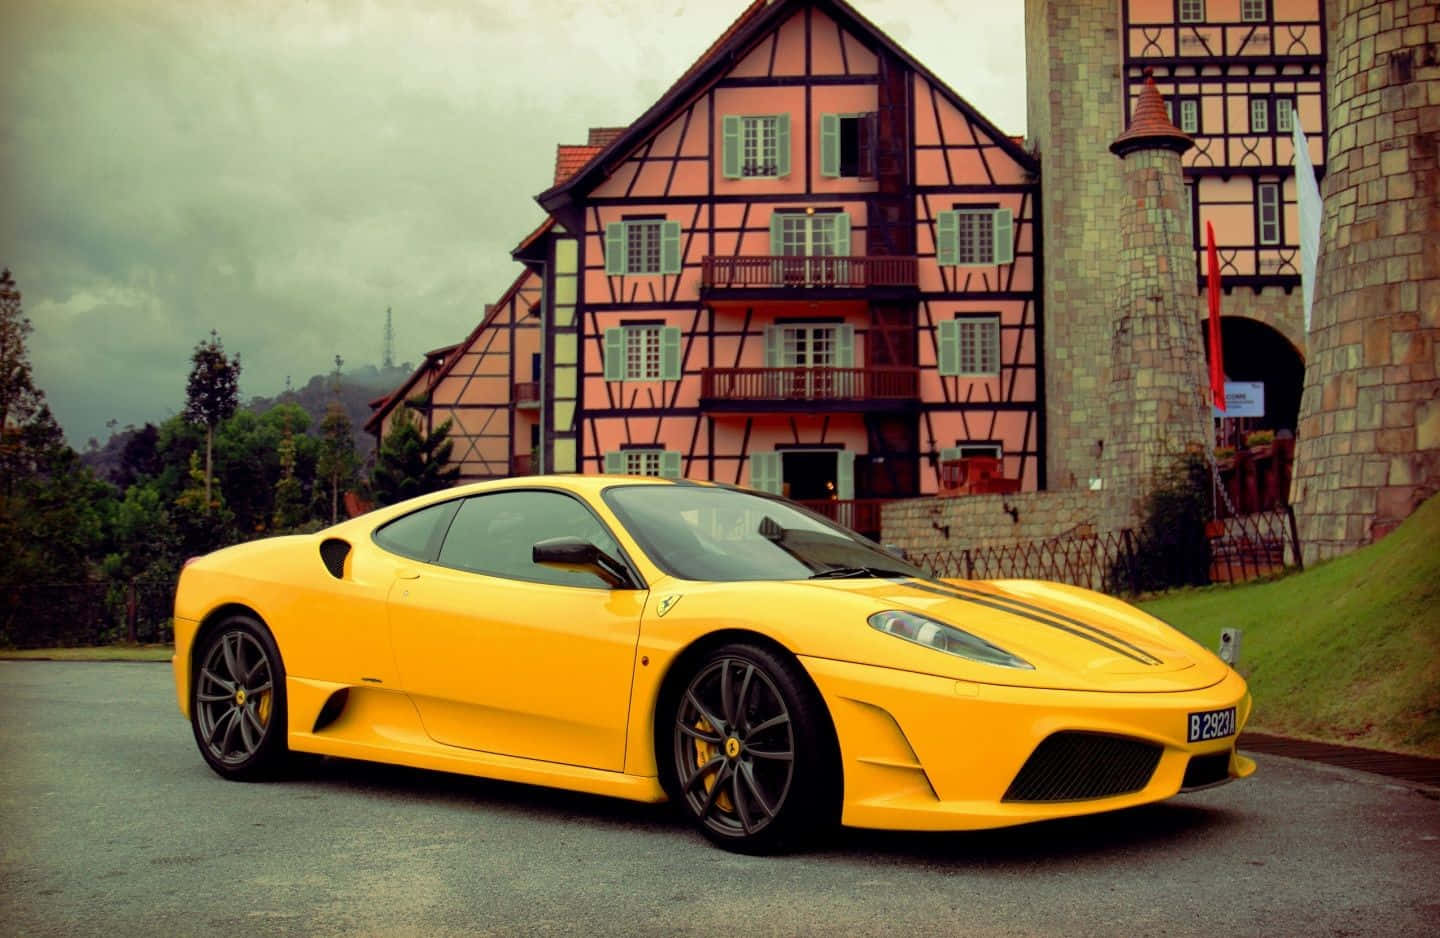 Captivating Yellow Car on the Road Wallpaper